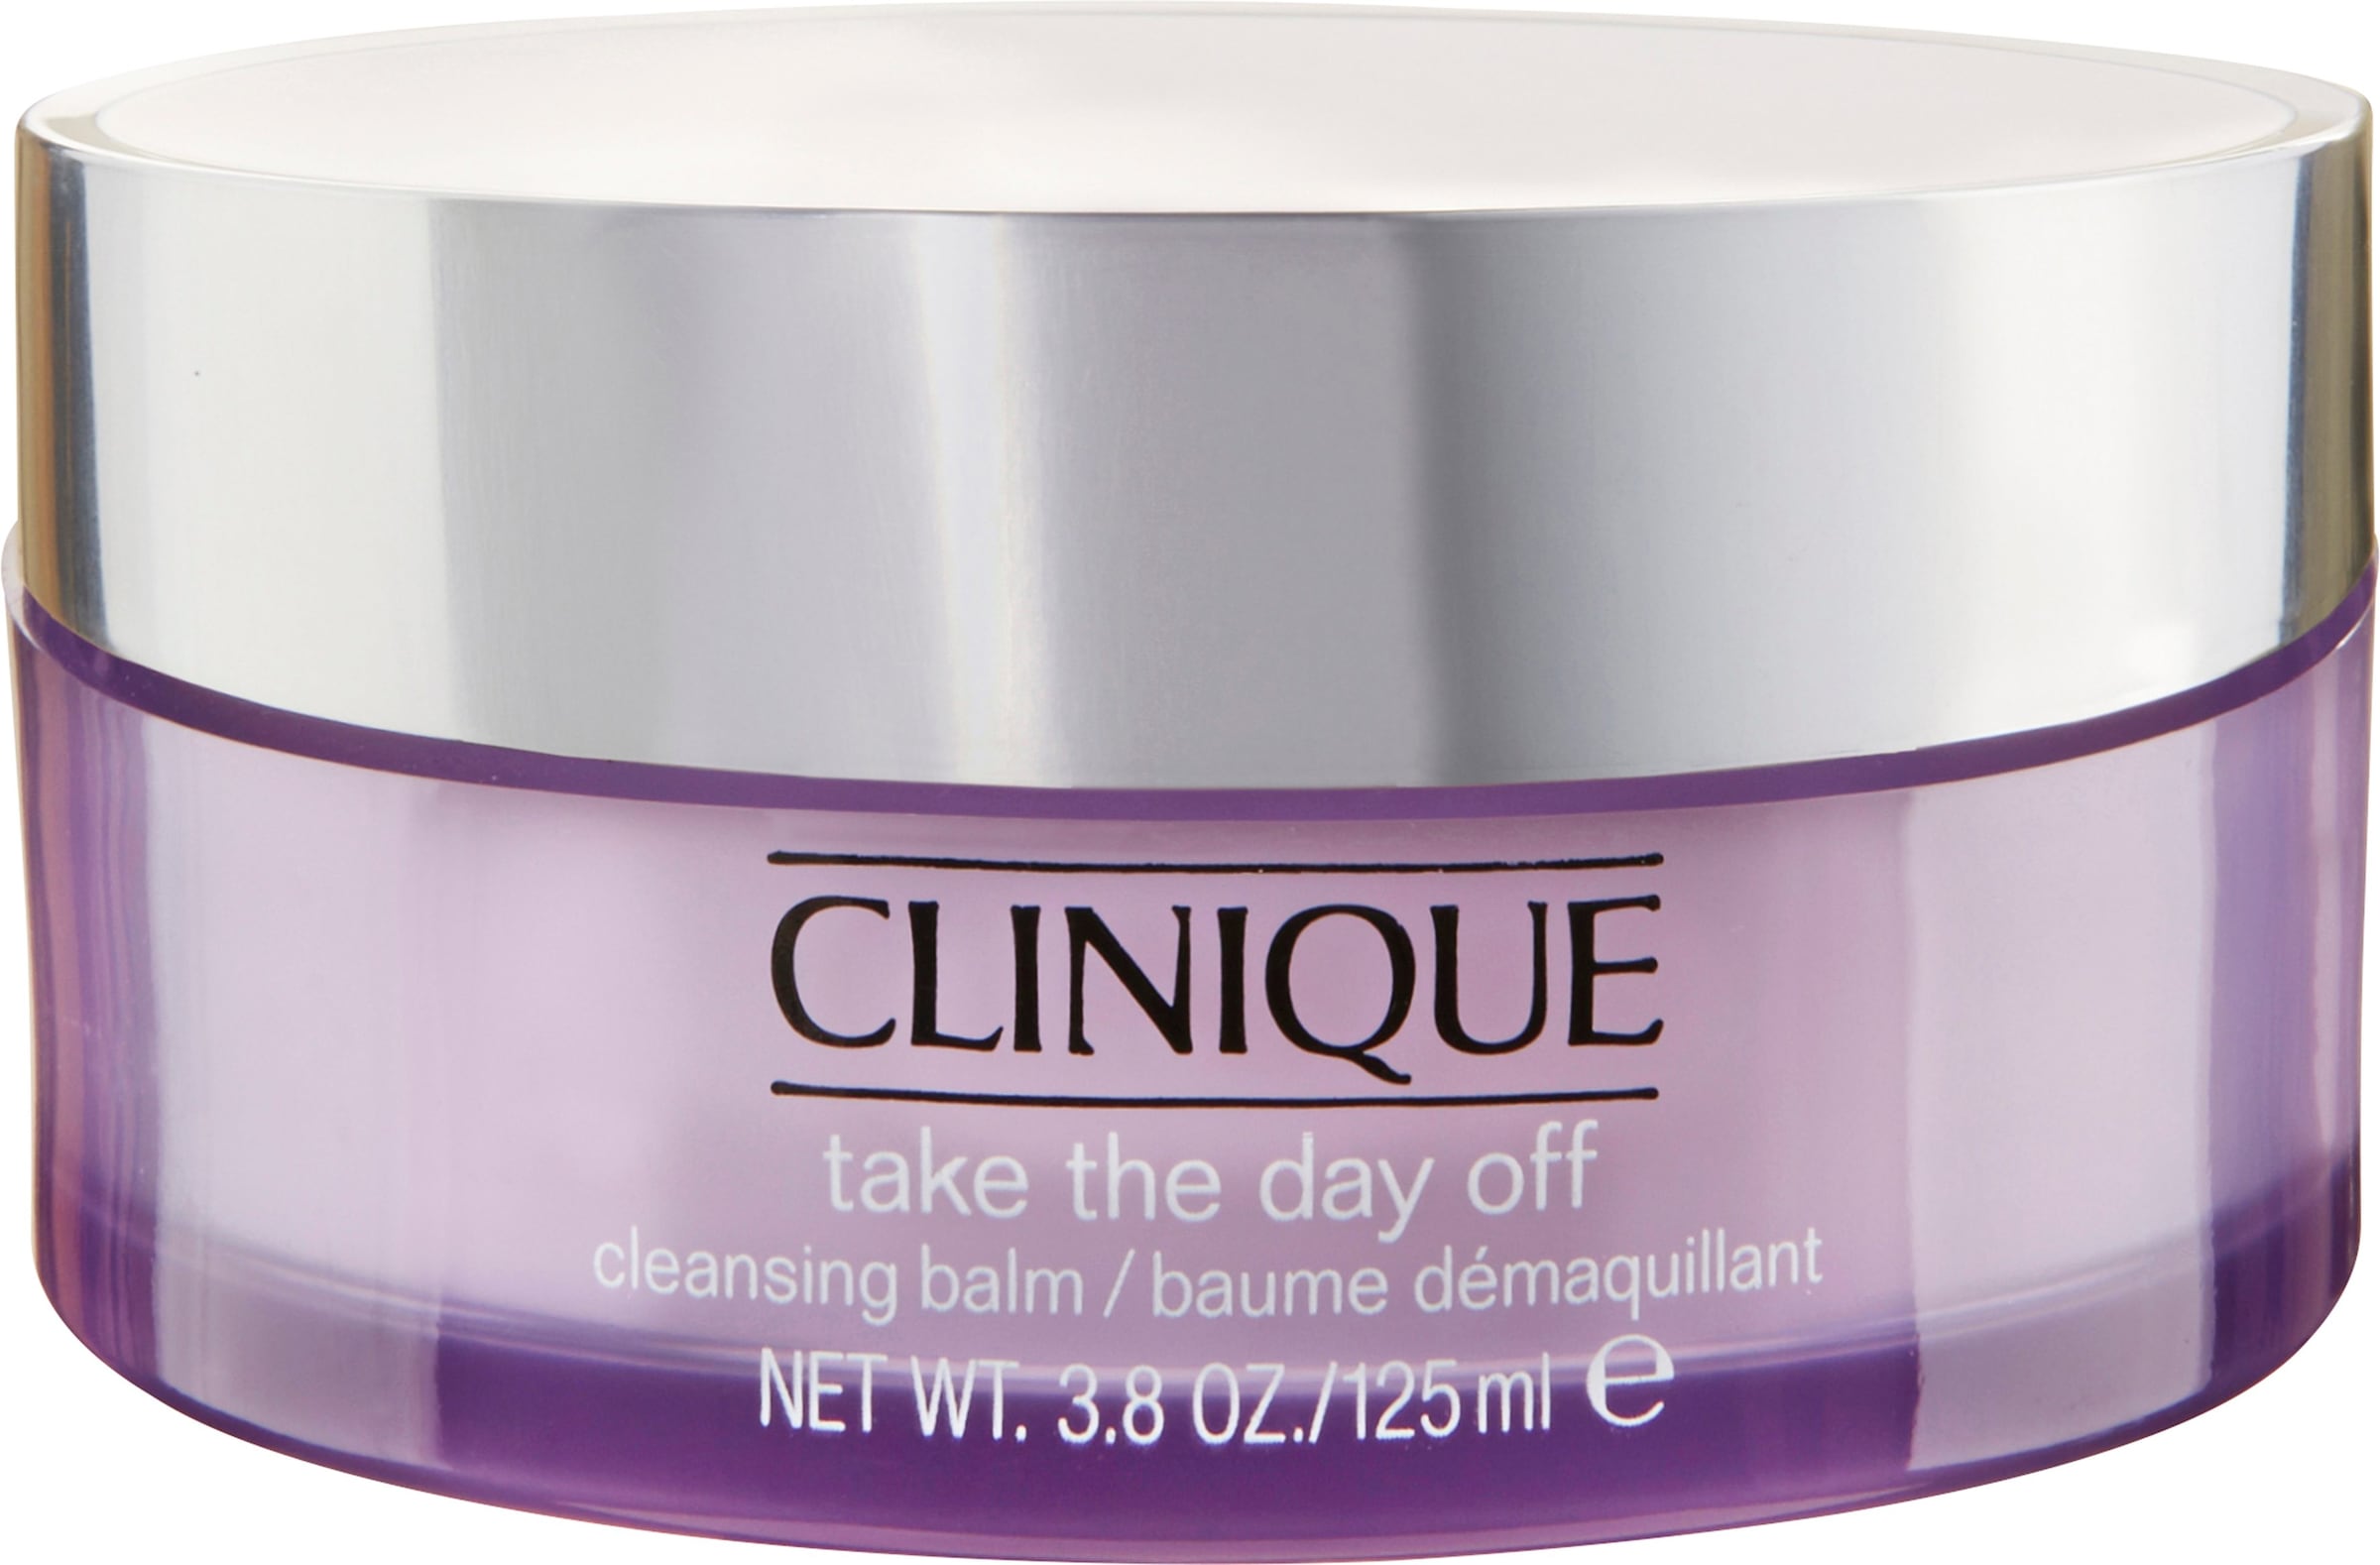 Take the day off cleansing. Clinique Cleansing Balm. Clinique take the Day off Cleansing Balm. Clinique take the Day off бальзам. Clinique take the Day off Cleansing Balm Baume.